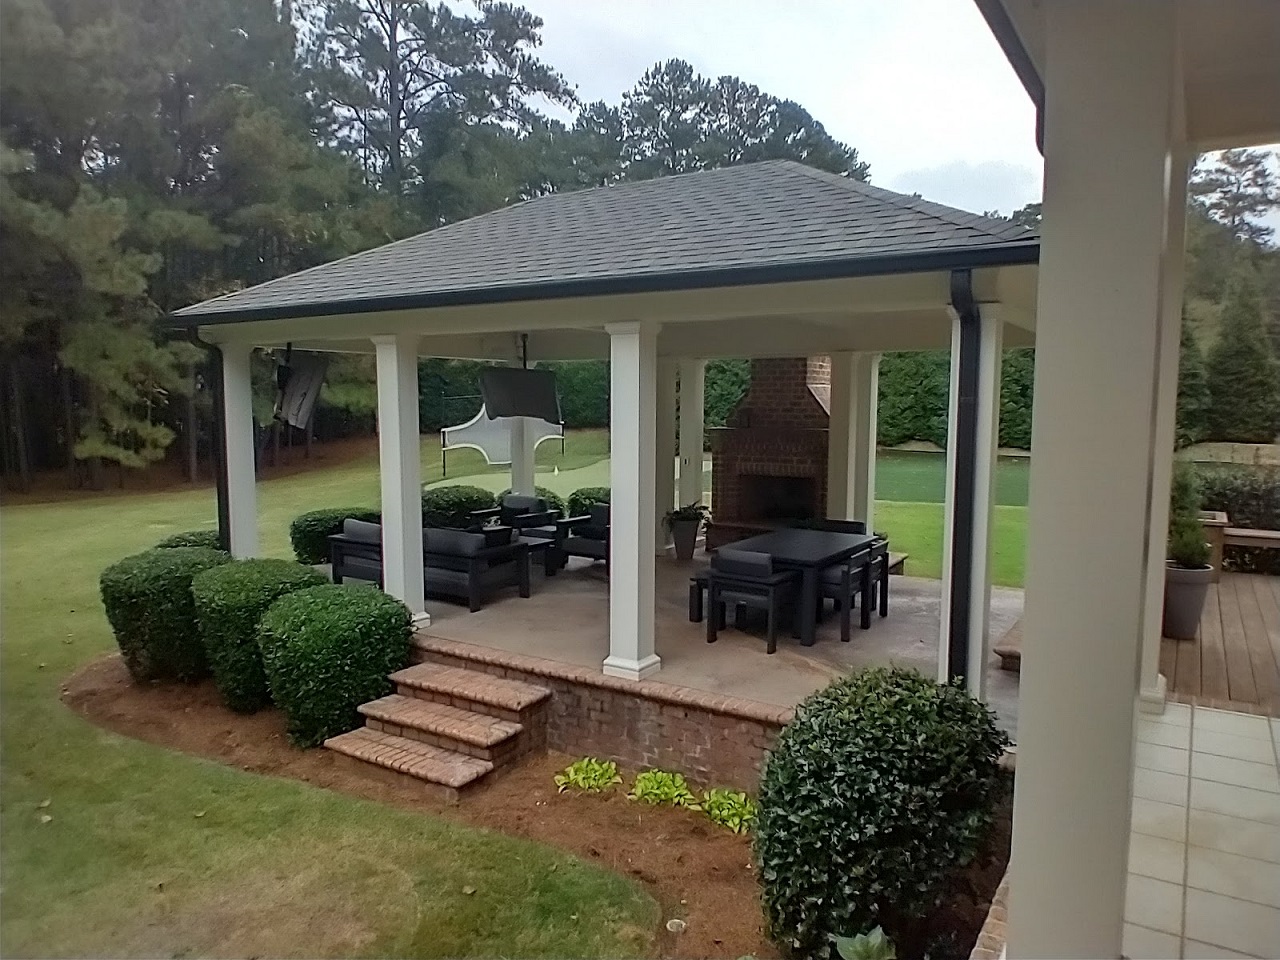 new custom gazebo in macon ga appears original to the home and surround